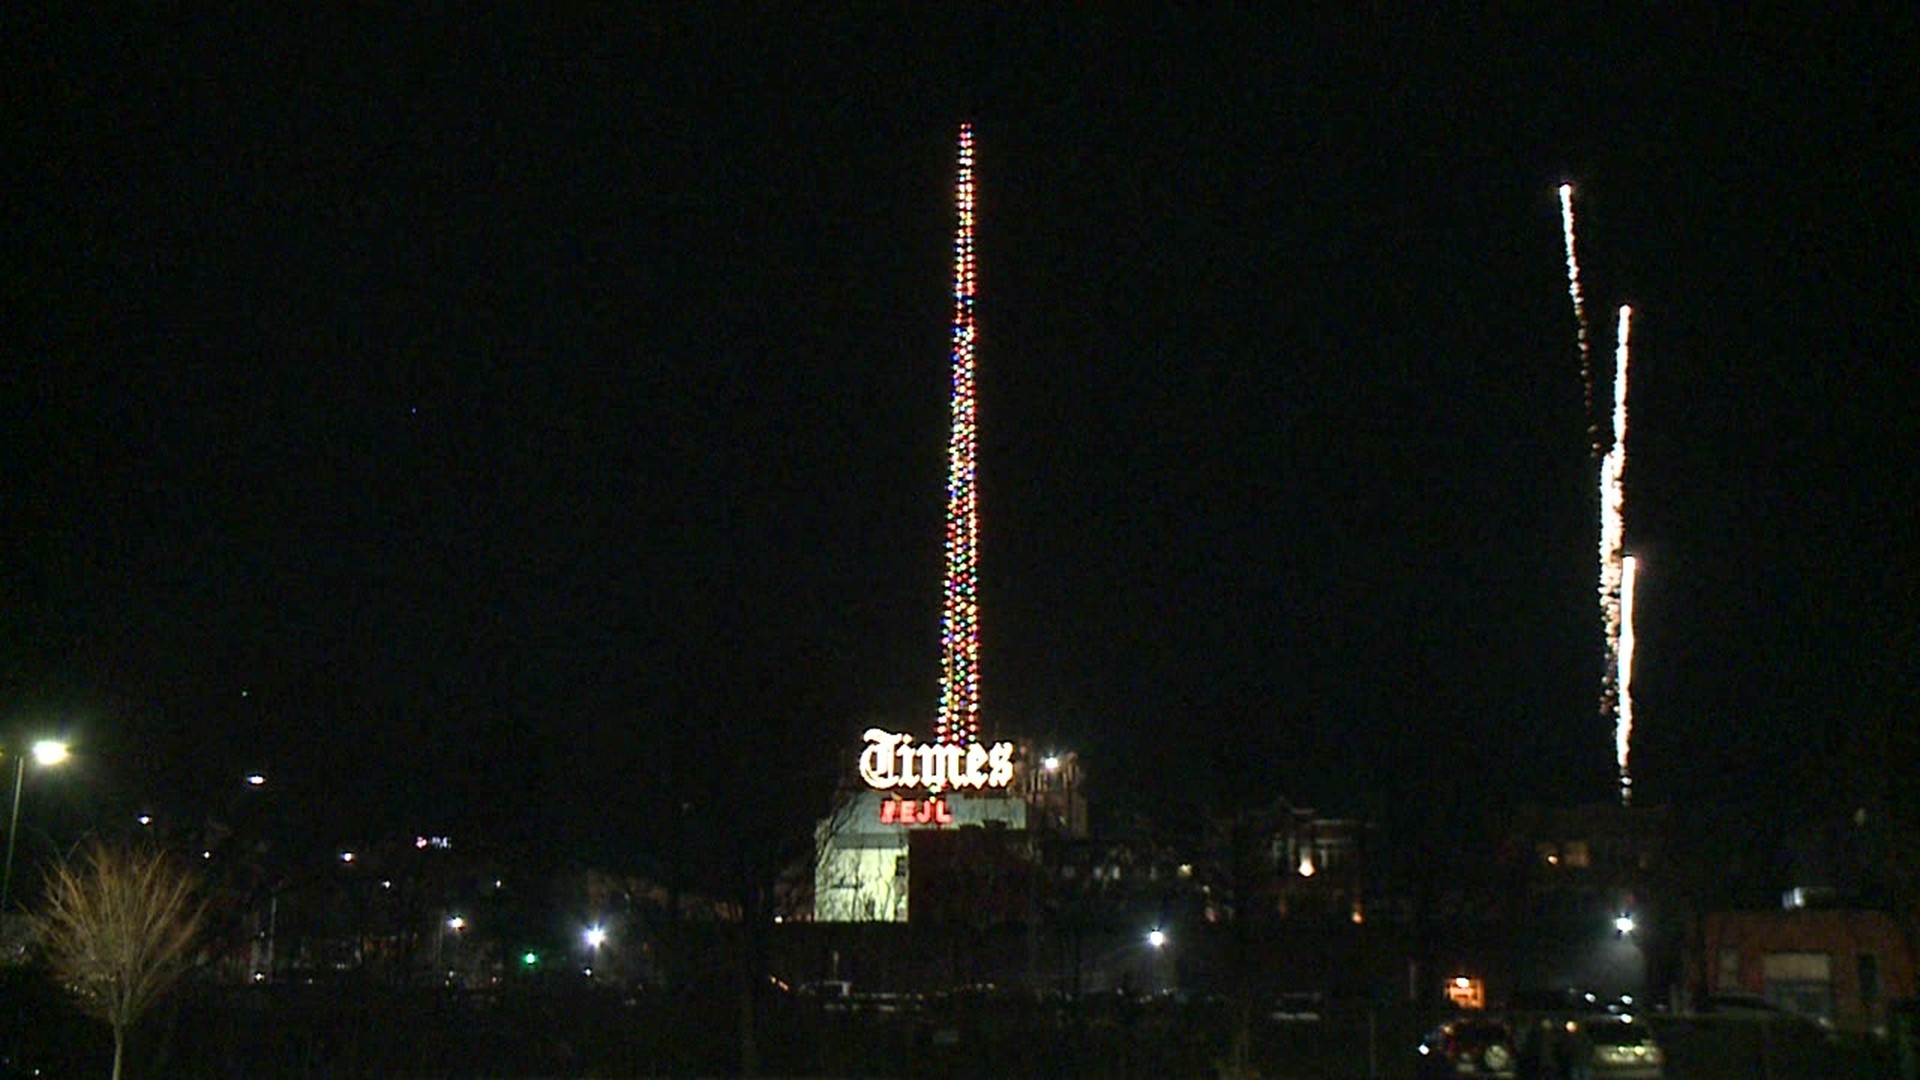 The holiday season kicked off with a bang as fireworks accompanied the annual lighting of the Times-Shamrock Radio Tower.